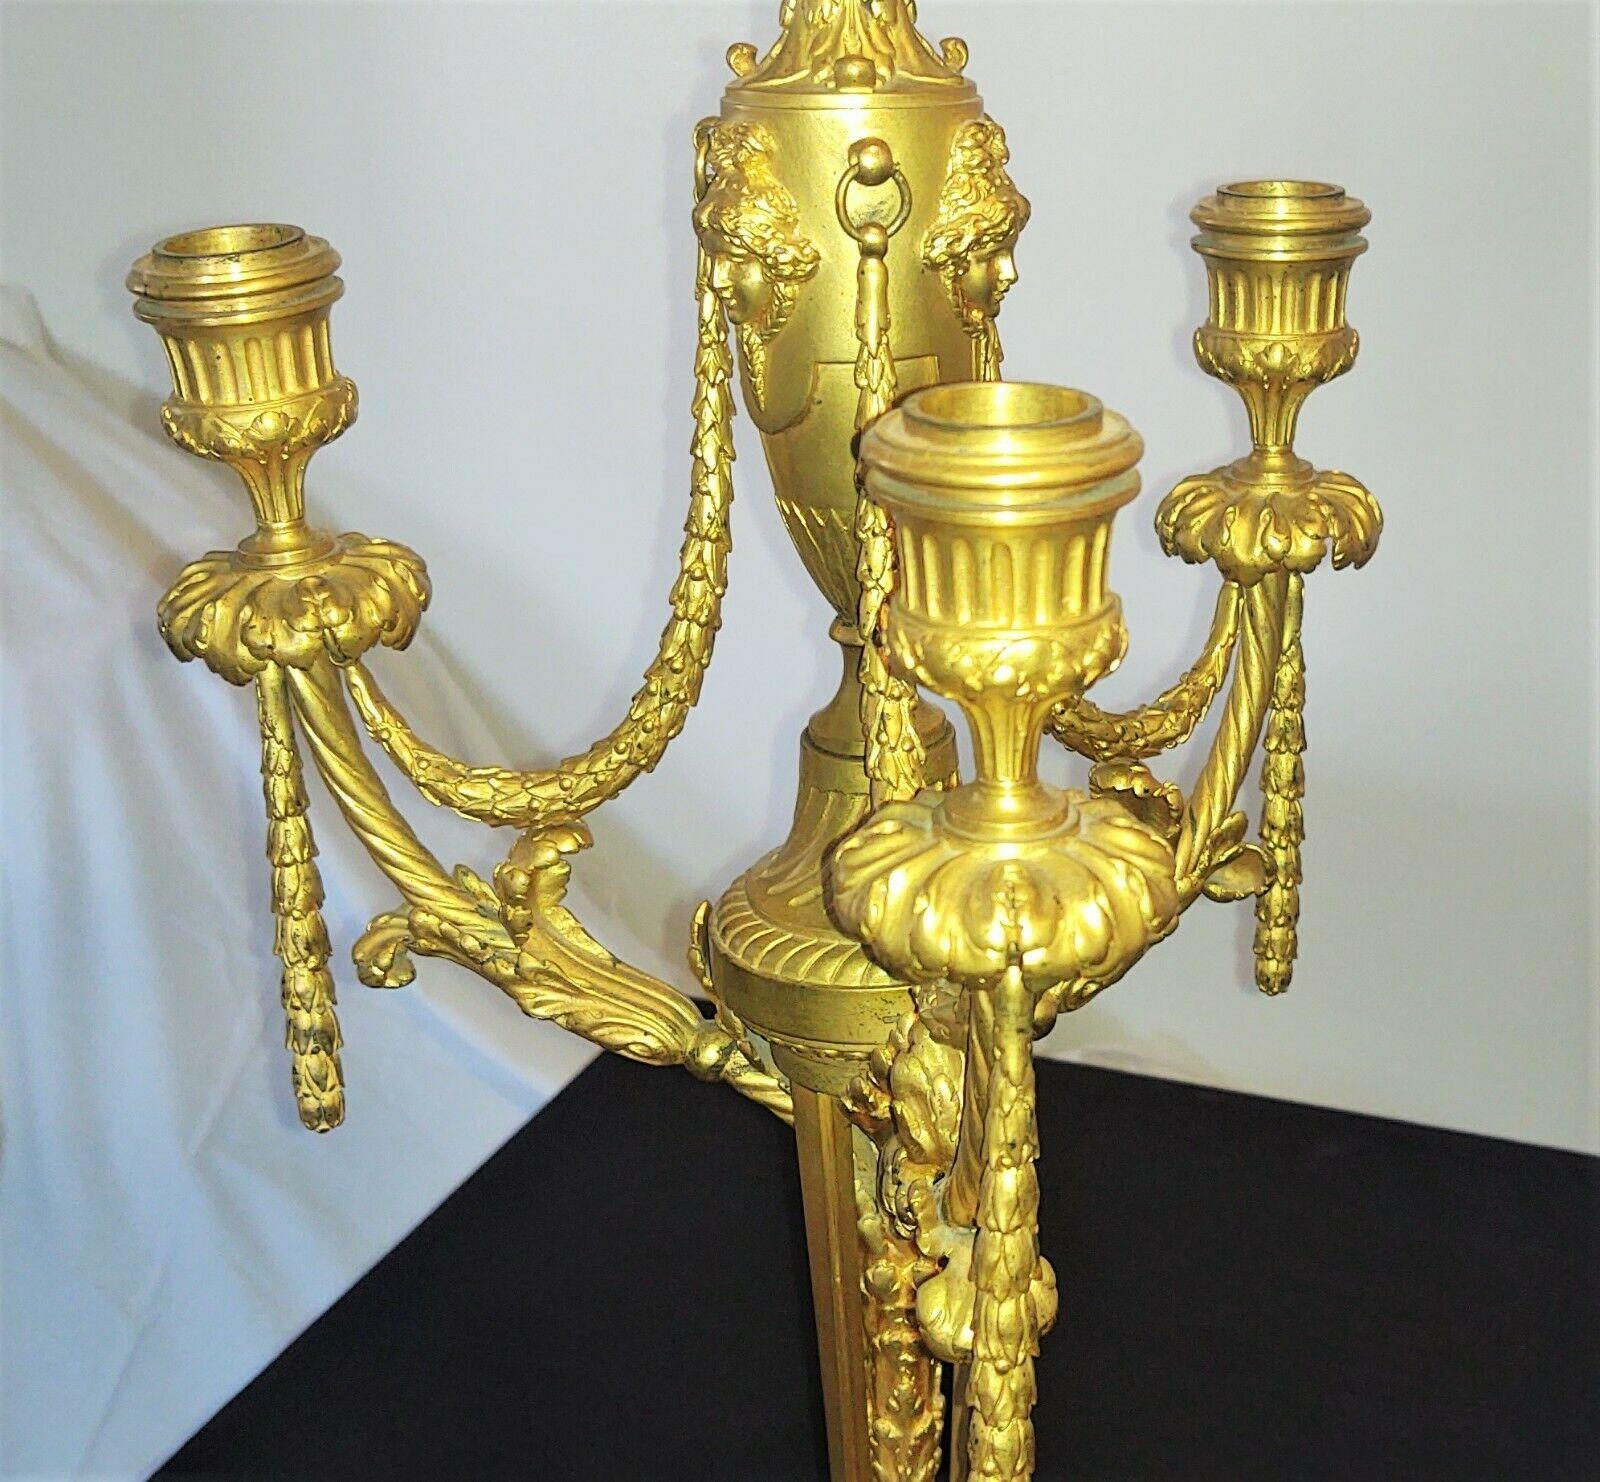 A very fine and large French 19th century Louis XVI gilt bronze candlestick lamp signed F. Barbedienne.